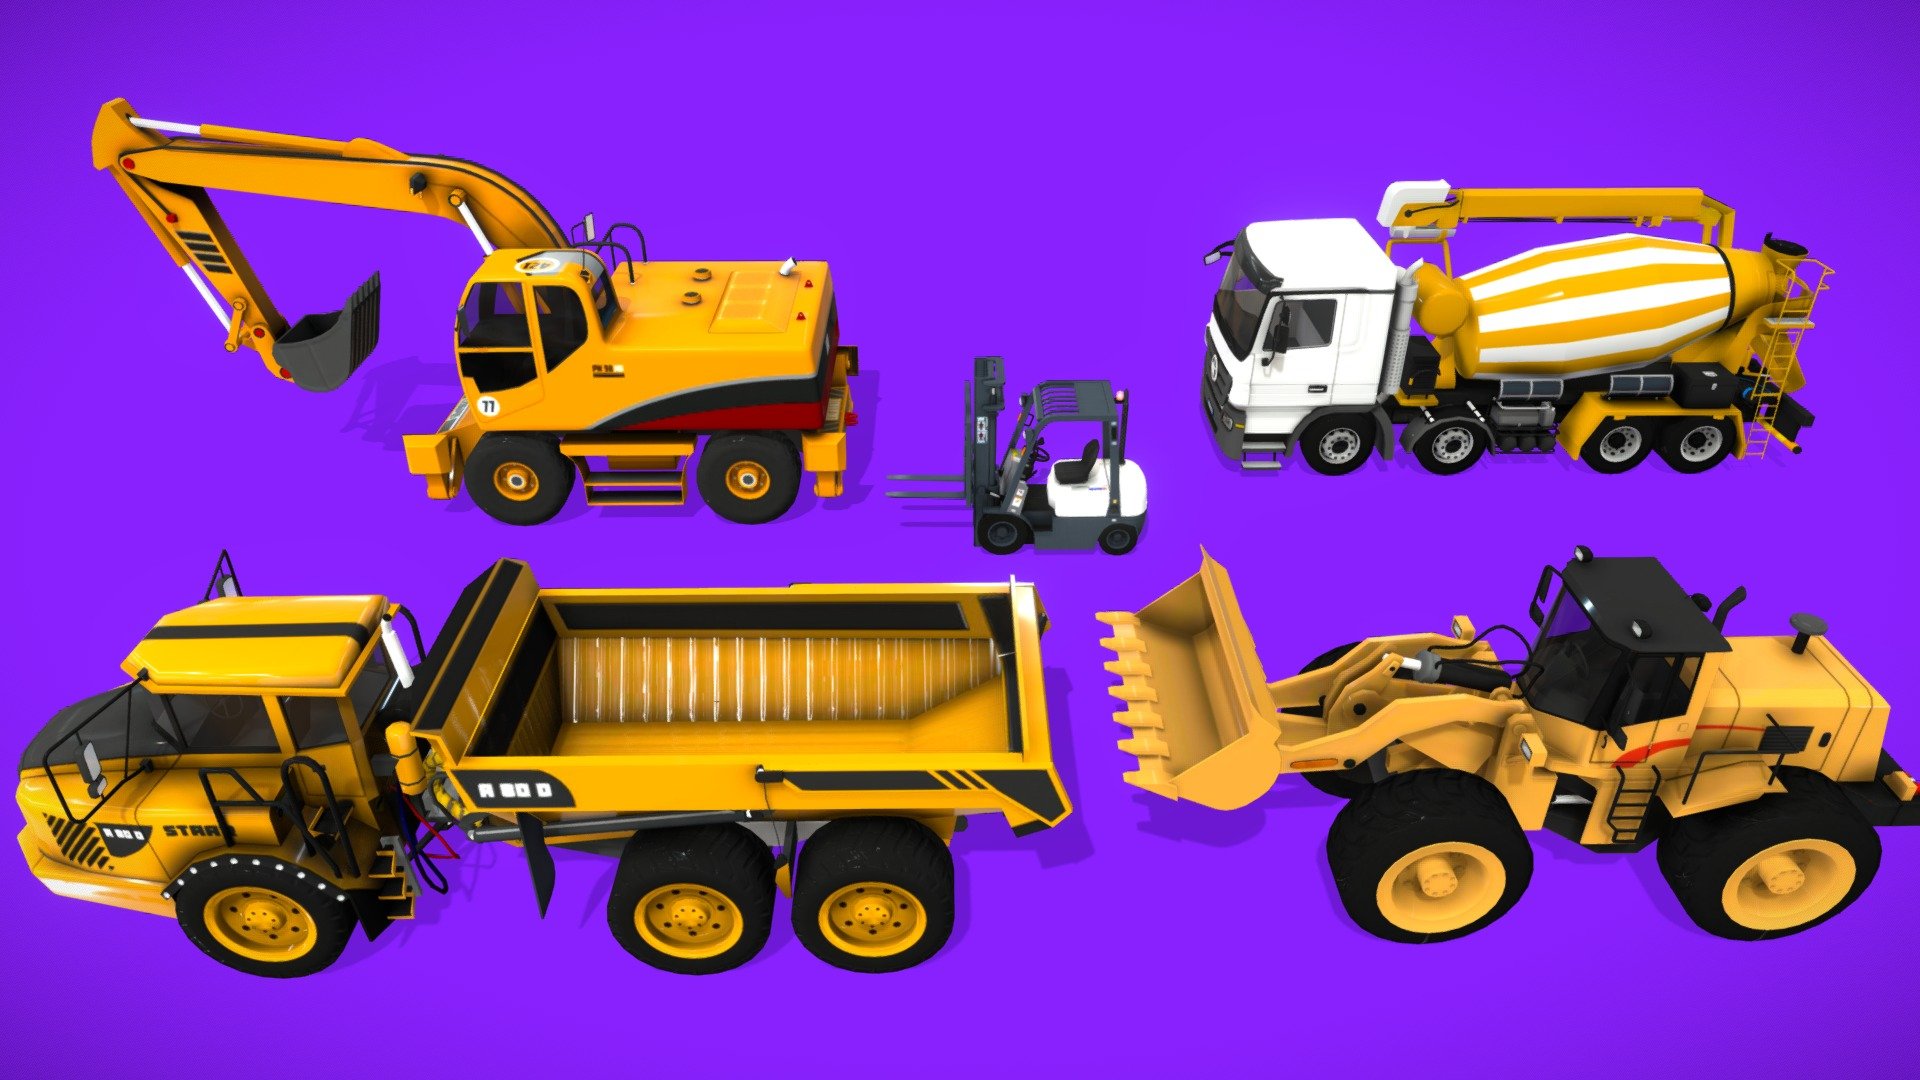 Introducing the Low Poly Construction Vehicles Pack – a meticulously crafted collection of 3D models tailored for mobile game developers, now available on the online asset store. This comprehensive pack brings a fleet of essential construction vehicles to life in a charming low poly style, perfect for adding a touch of realism and functionality to your mobile game environments.

Technical Details:

Texture dimensions: 1024px (Diffuse/Normal/Specular)

Number of models: 5

Rigged: Yes

UV mapping: Yes

Polygon Counts:

Excavator: Verts 15.2k

Bulldozer: Verts 14.5k

Mixer Truck: Verts 17.5k

Loader Truck: Verts 14.2k

Forklift: Verts 9.1k

Don't miss the opportunity to elevate your mobile game's construction-themed levels with the Low Poly Construction Vehicles. Streamline your development process, captivate players with charming visuals, and create an immersive gaming experience that's both delightful and optimized for mobile platforms. Get your pack today and start constructing your virtual world! - Low Poly Construction Vehicles Pack - Buy Royalty Free 3D model by Zero Grid (@Zerogrid) 3d model